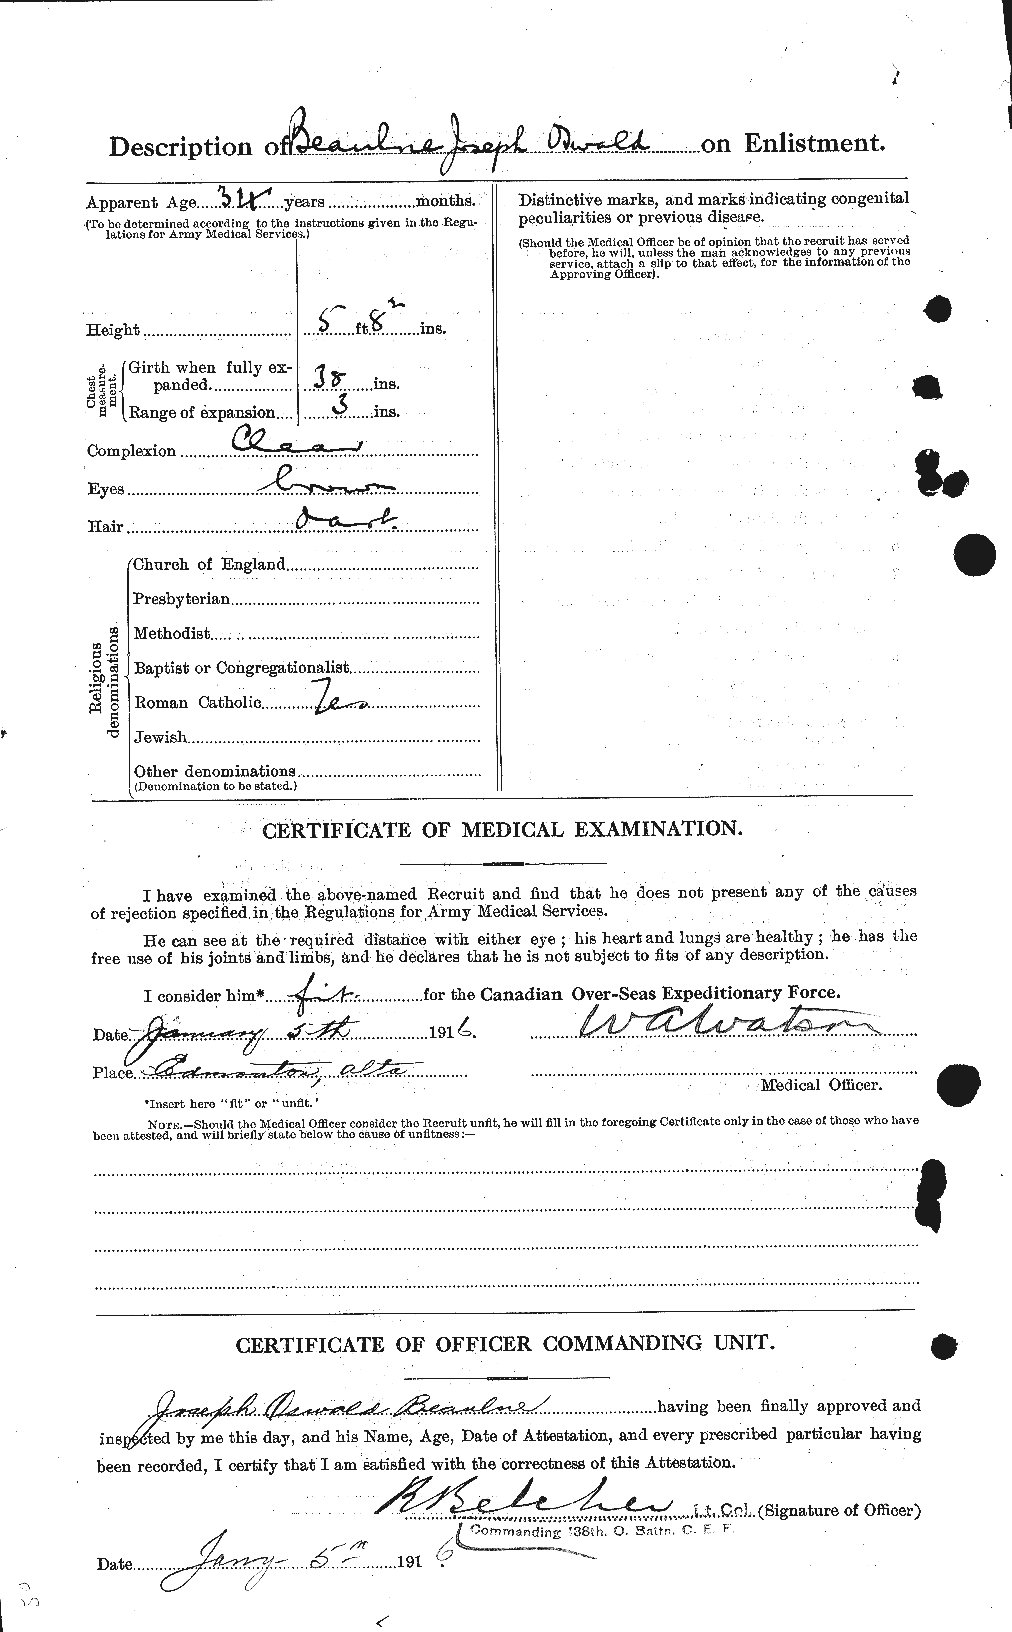 Personnel Records of the First World War - CEF 231622b